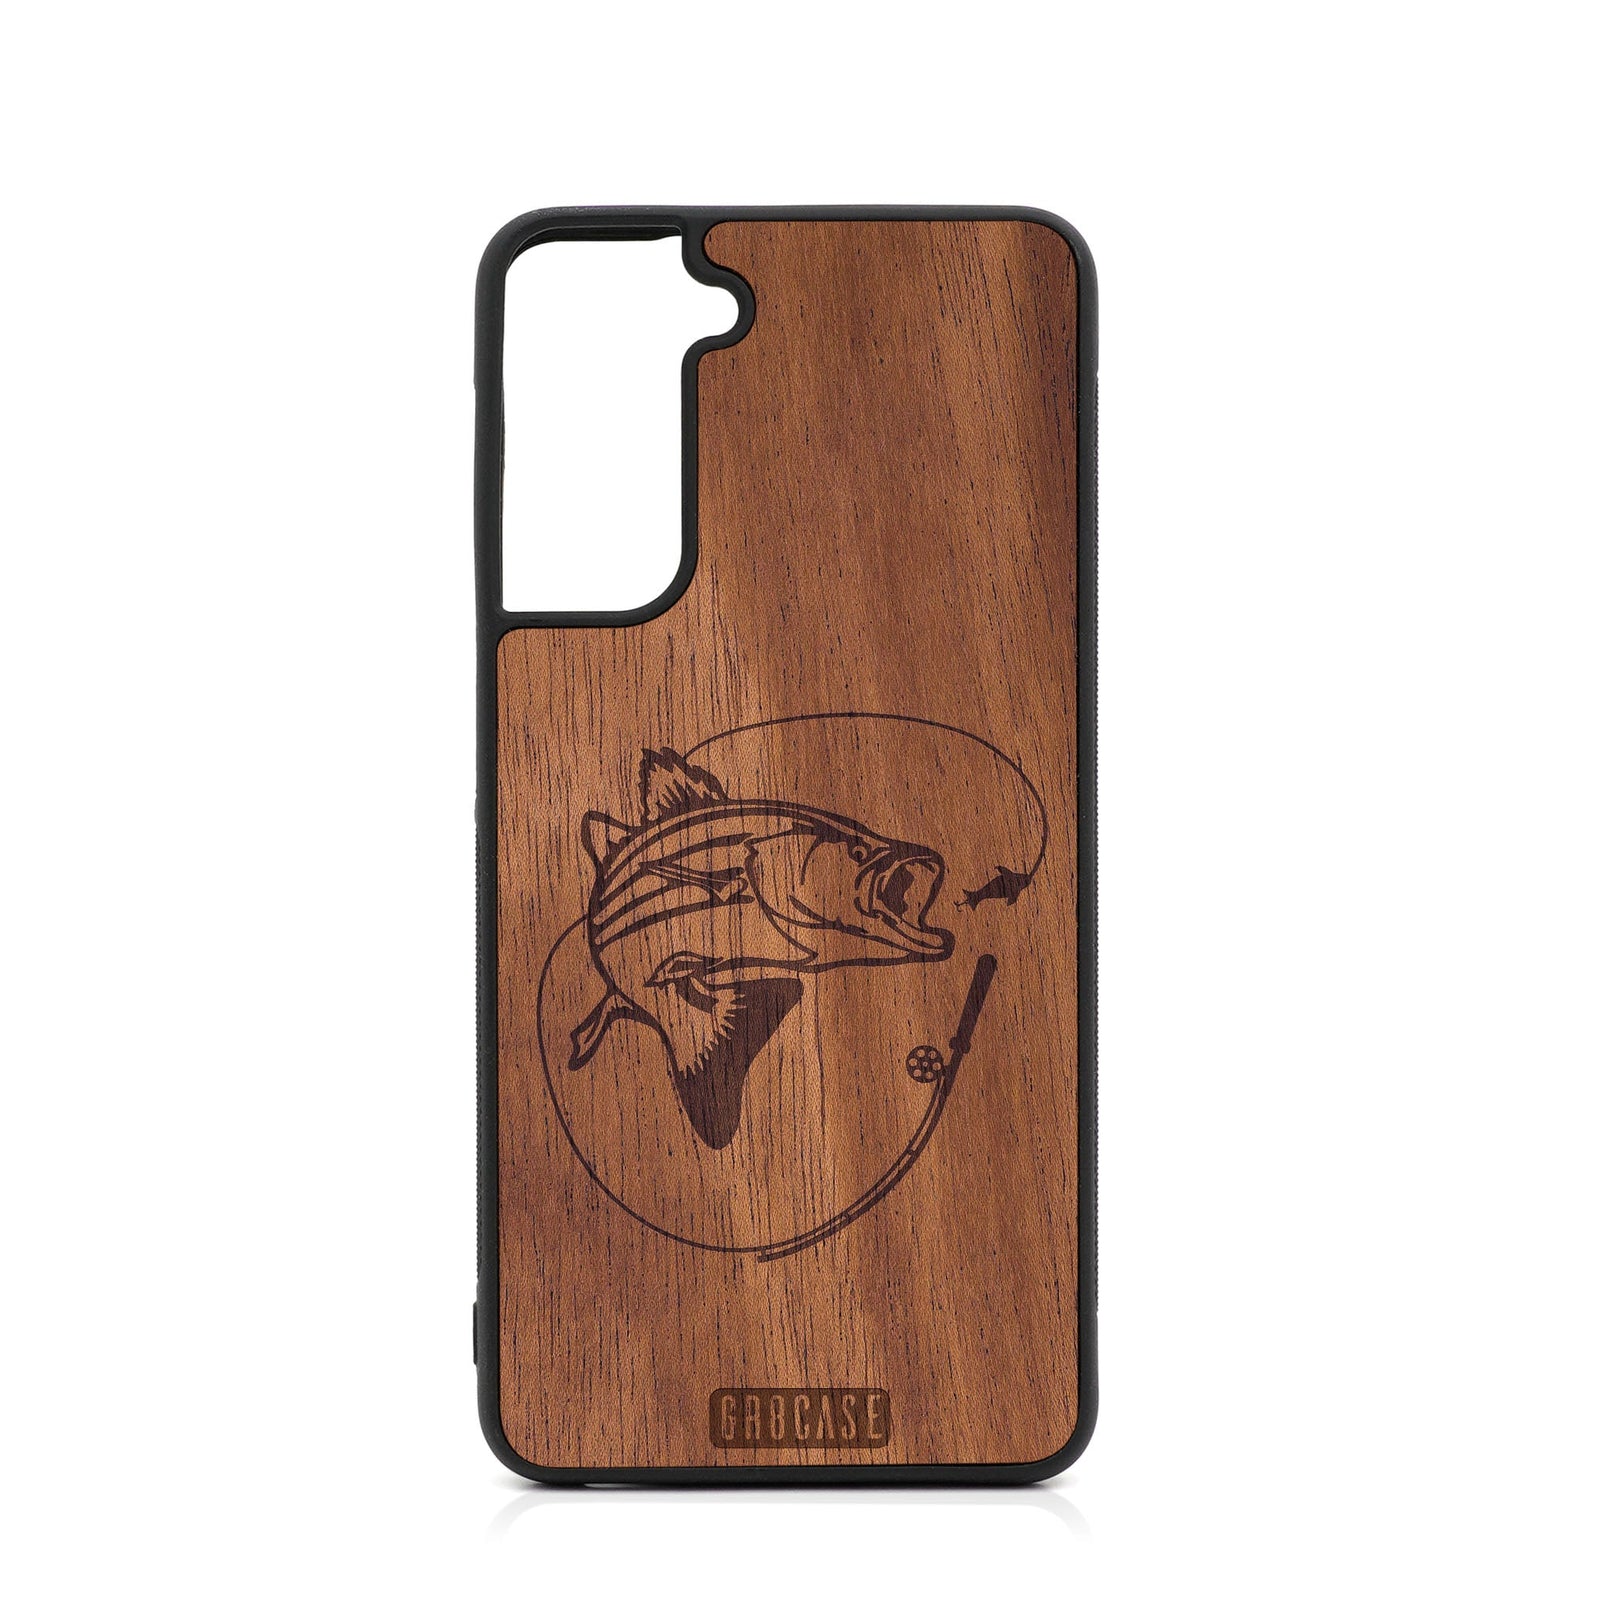 iPhone XS Max Wood Case Fish and Reel Design